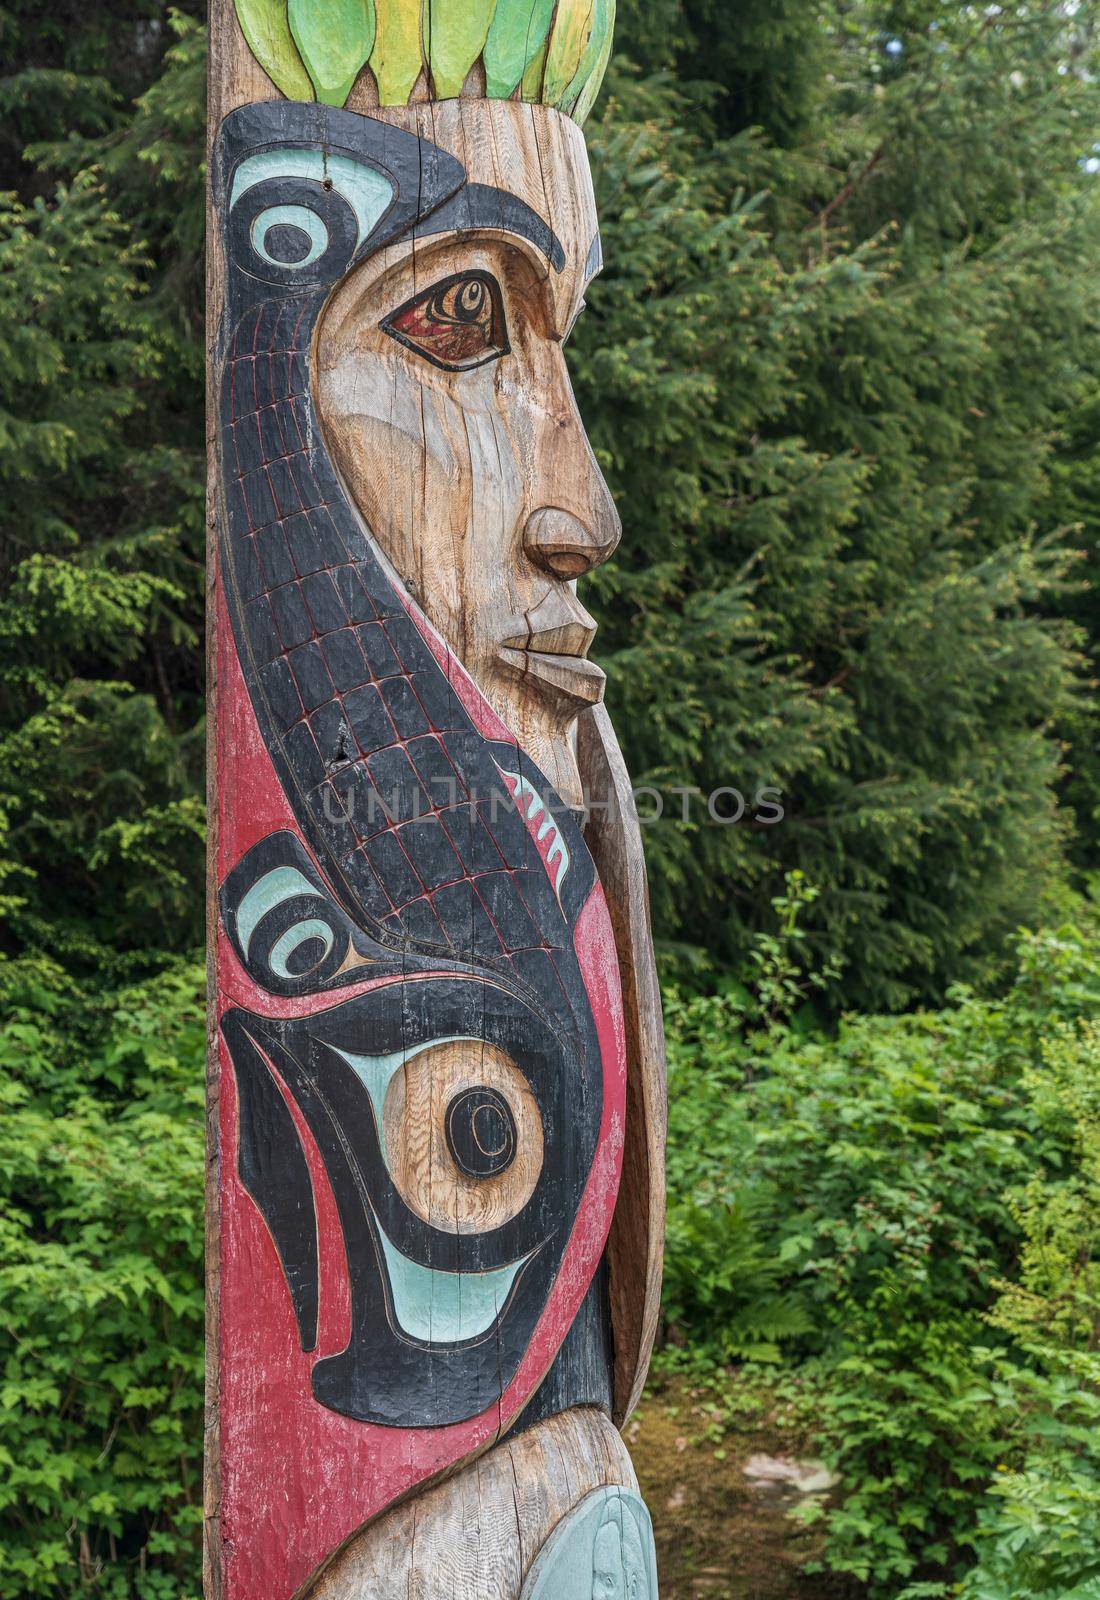 Detail of carved totem pole in the Sitka National Historical Park in Alaska by steheap